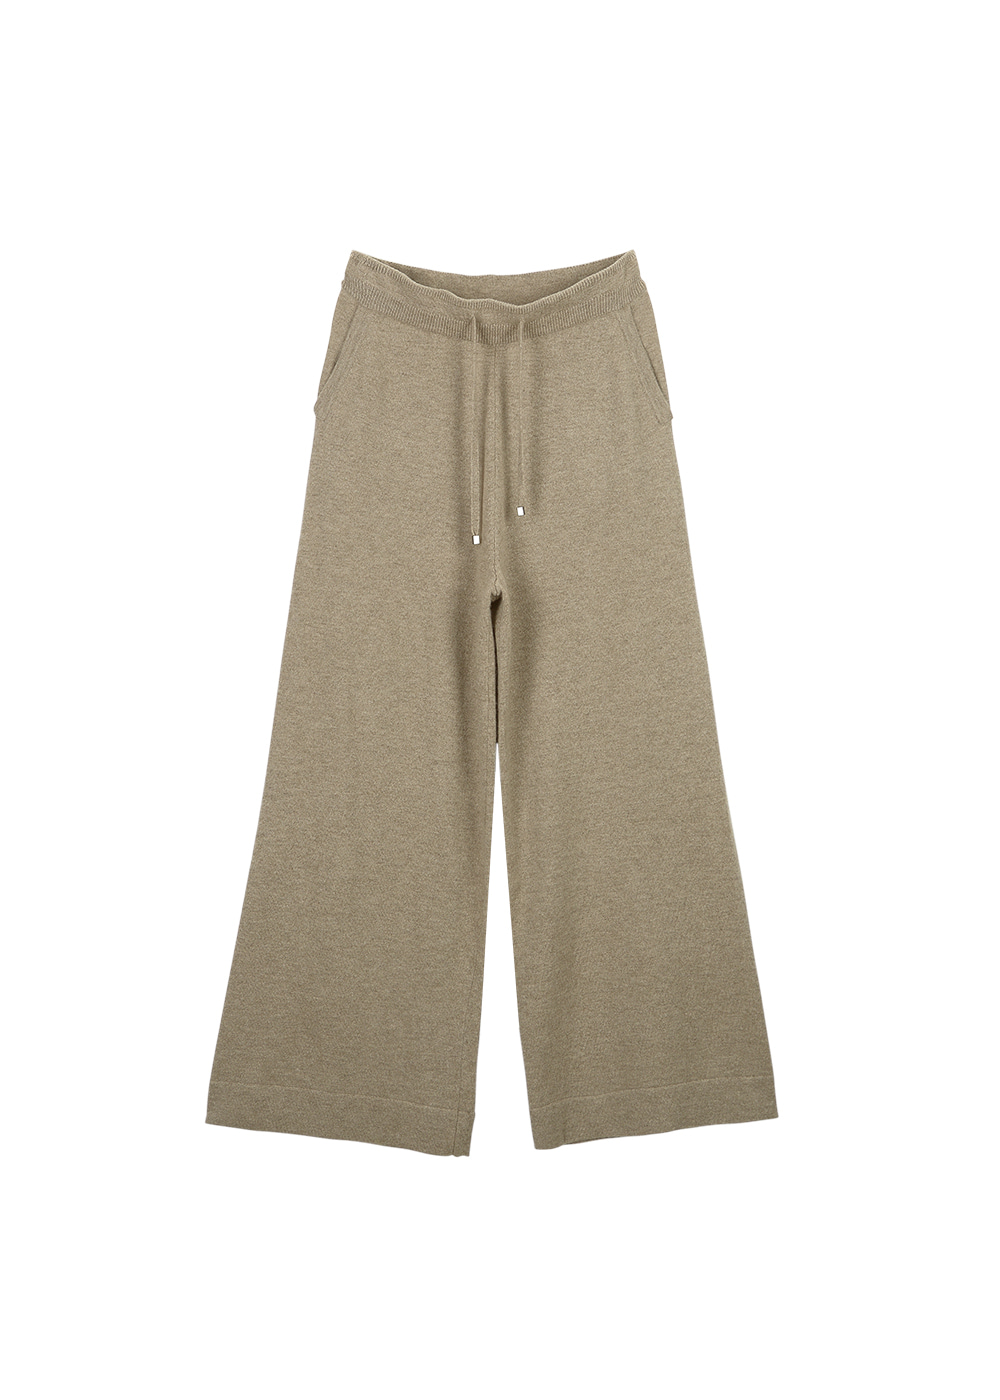 Wide fit knit pants(cappuccino)